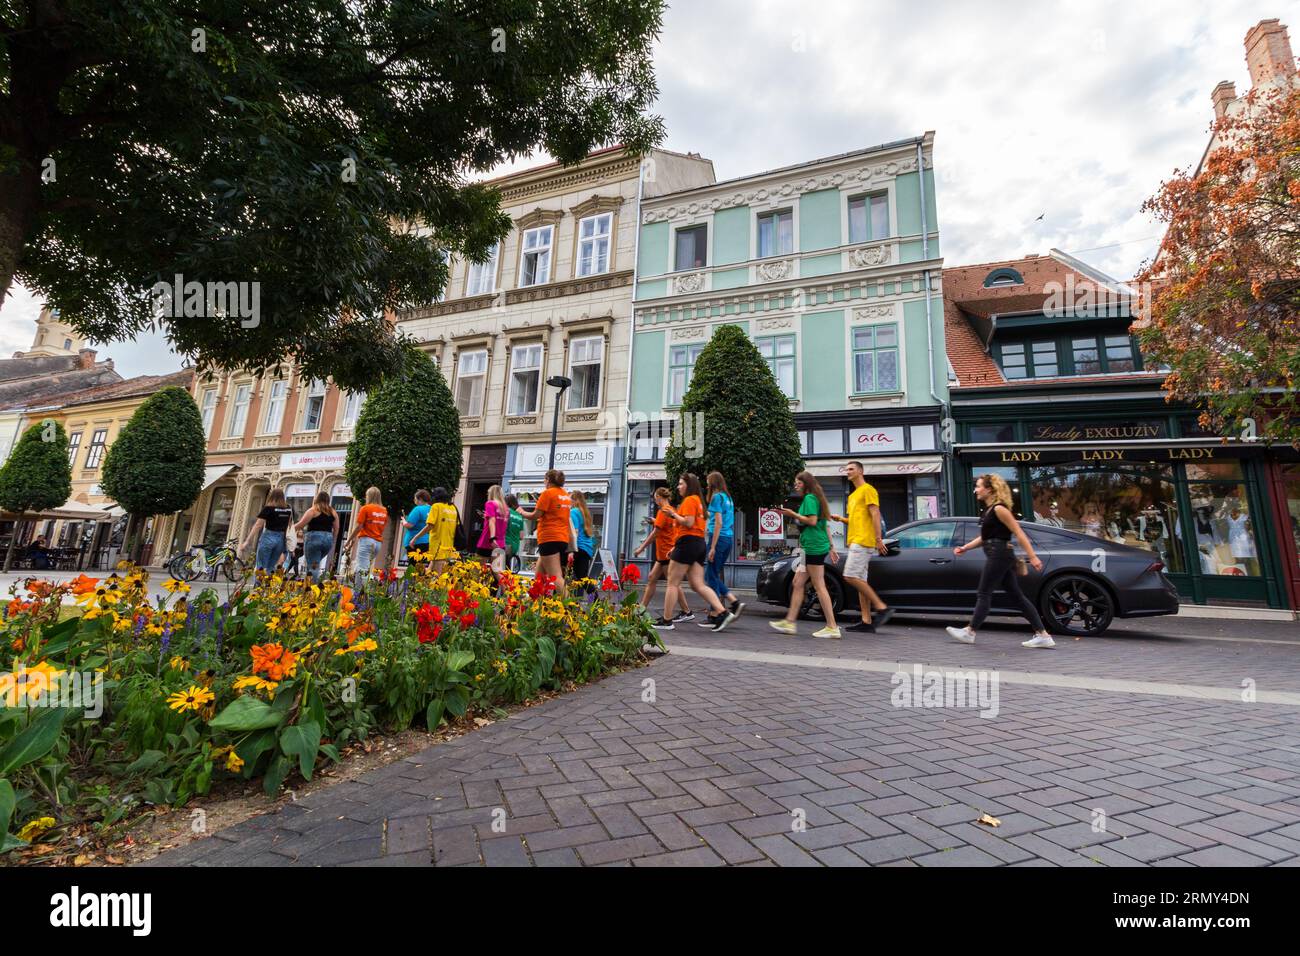 Students of Sopron University walking dressed in colourful T-shirts in Varkerulet during Freshers' week, Sopron, Hungary Stock Photo